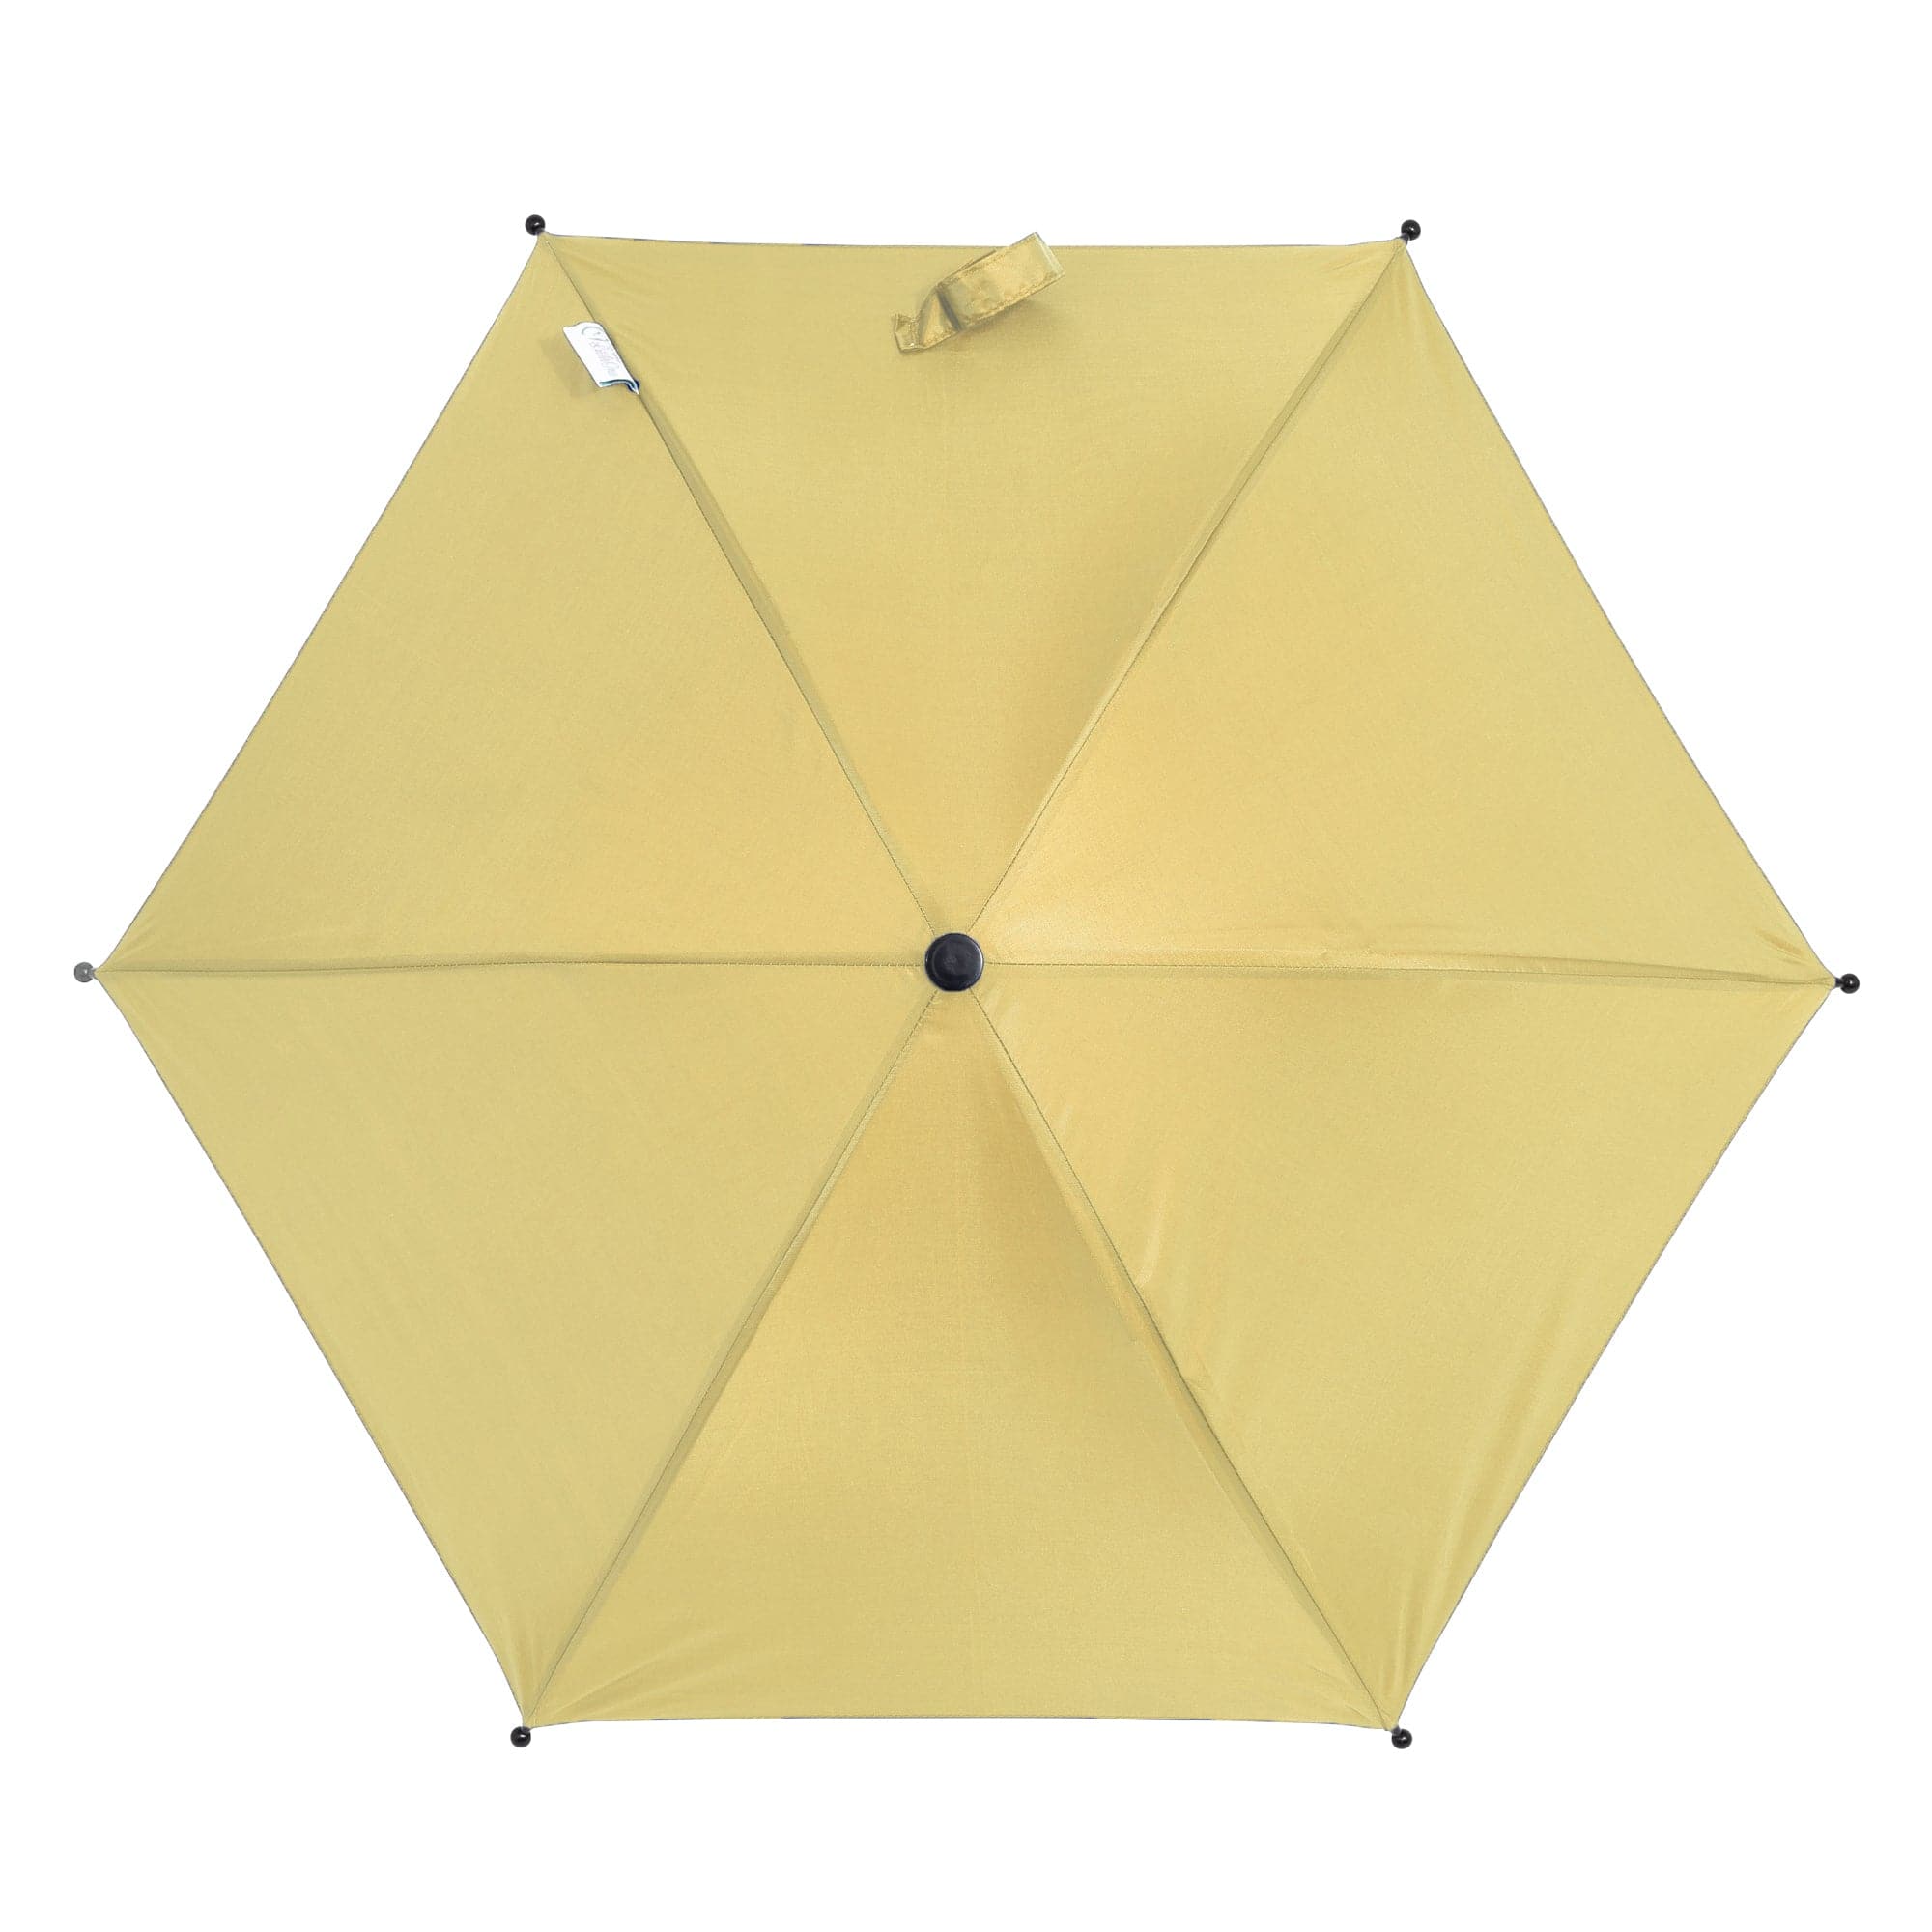 Baby Parasol Compatible With BabyDan - Fits All Models - For Your Little One